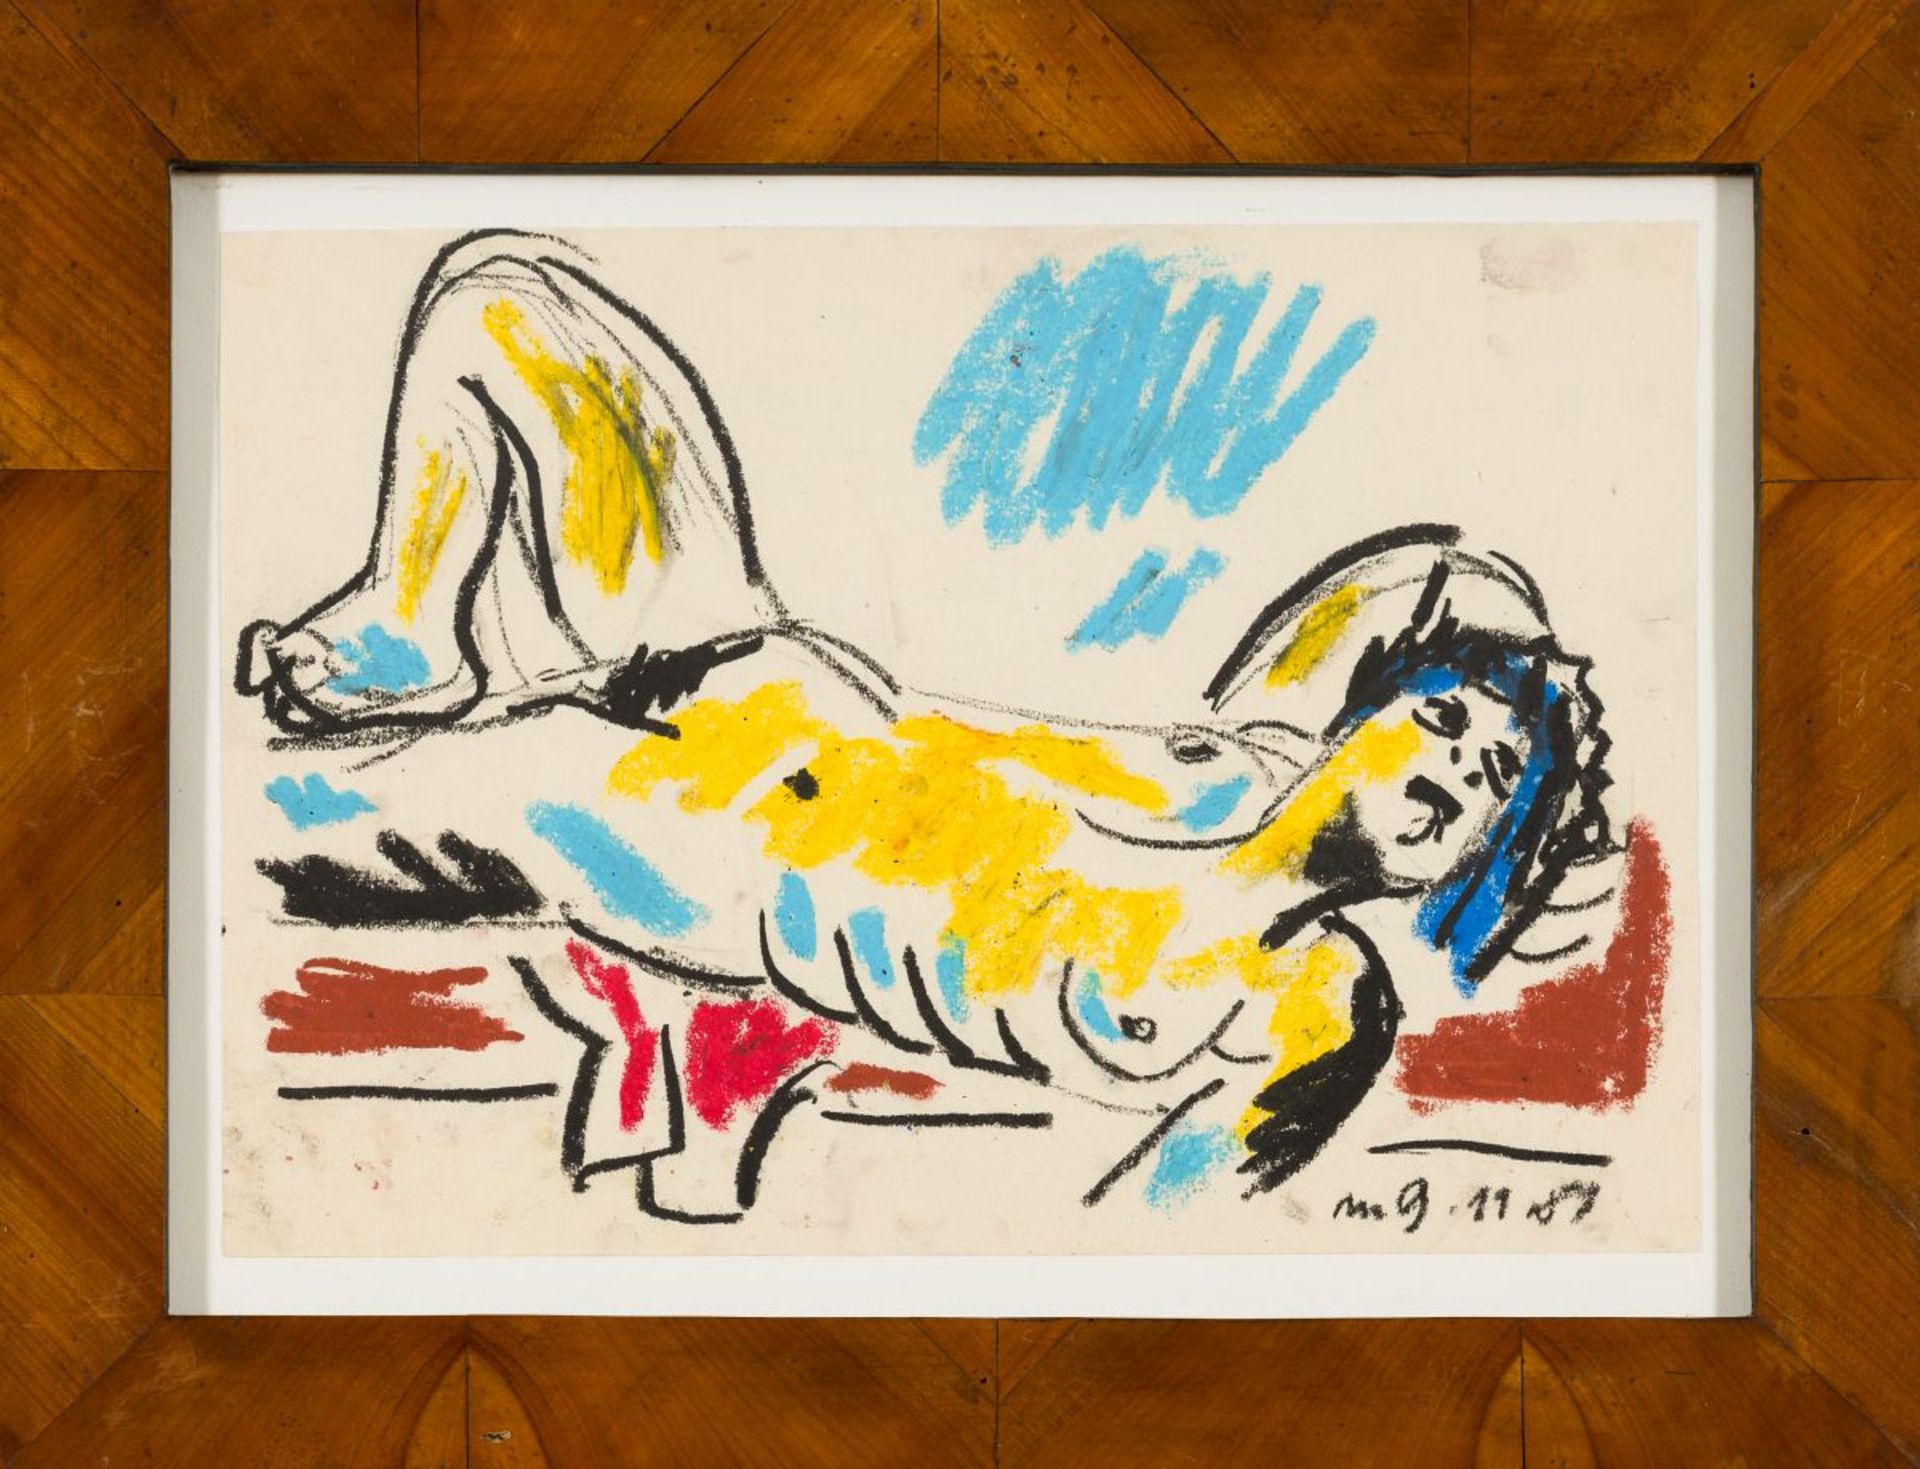 Mühl, Otto(1925 - 2013)Reclining Female Nude, 9.11.89oil pastel on papermonogrammed and dated - Image 2 of 4